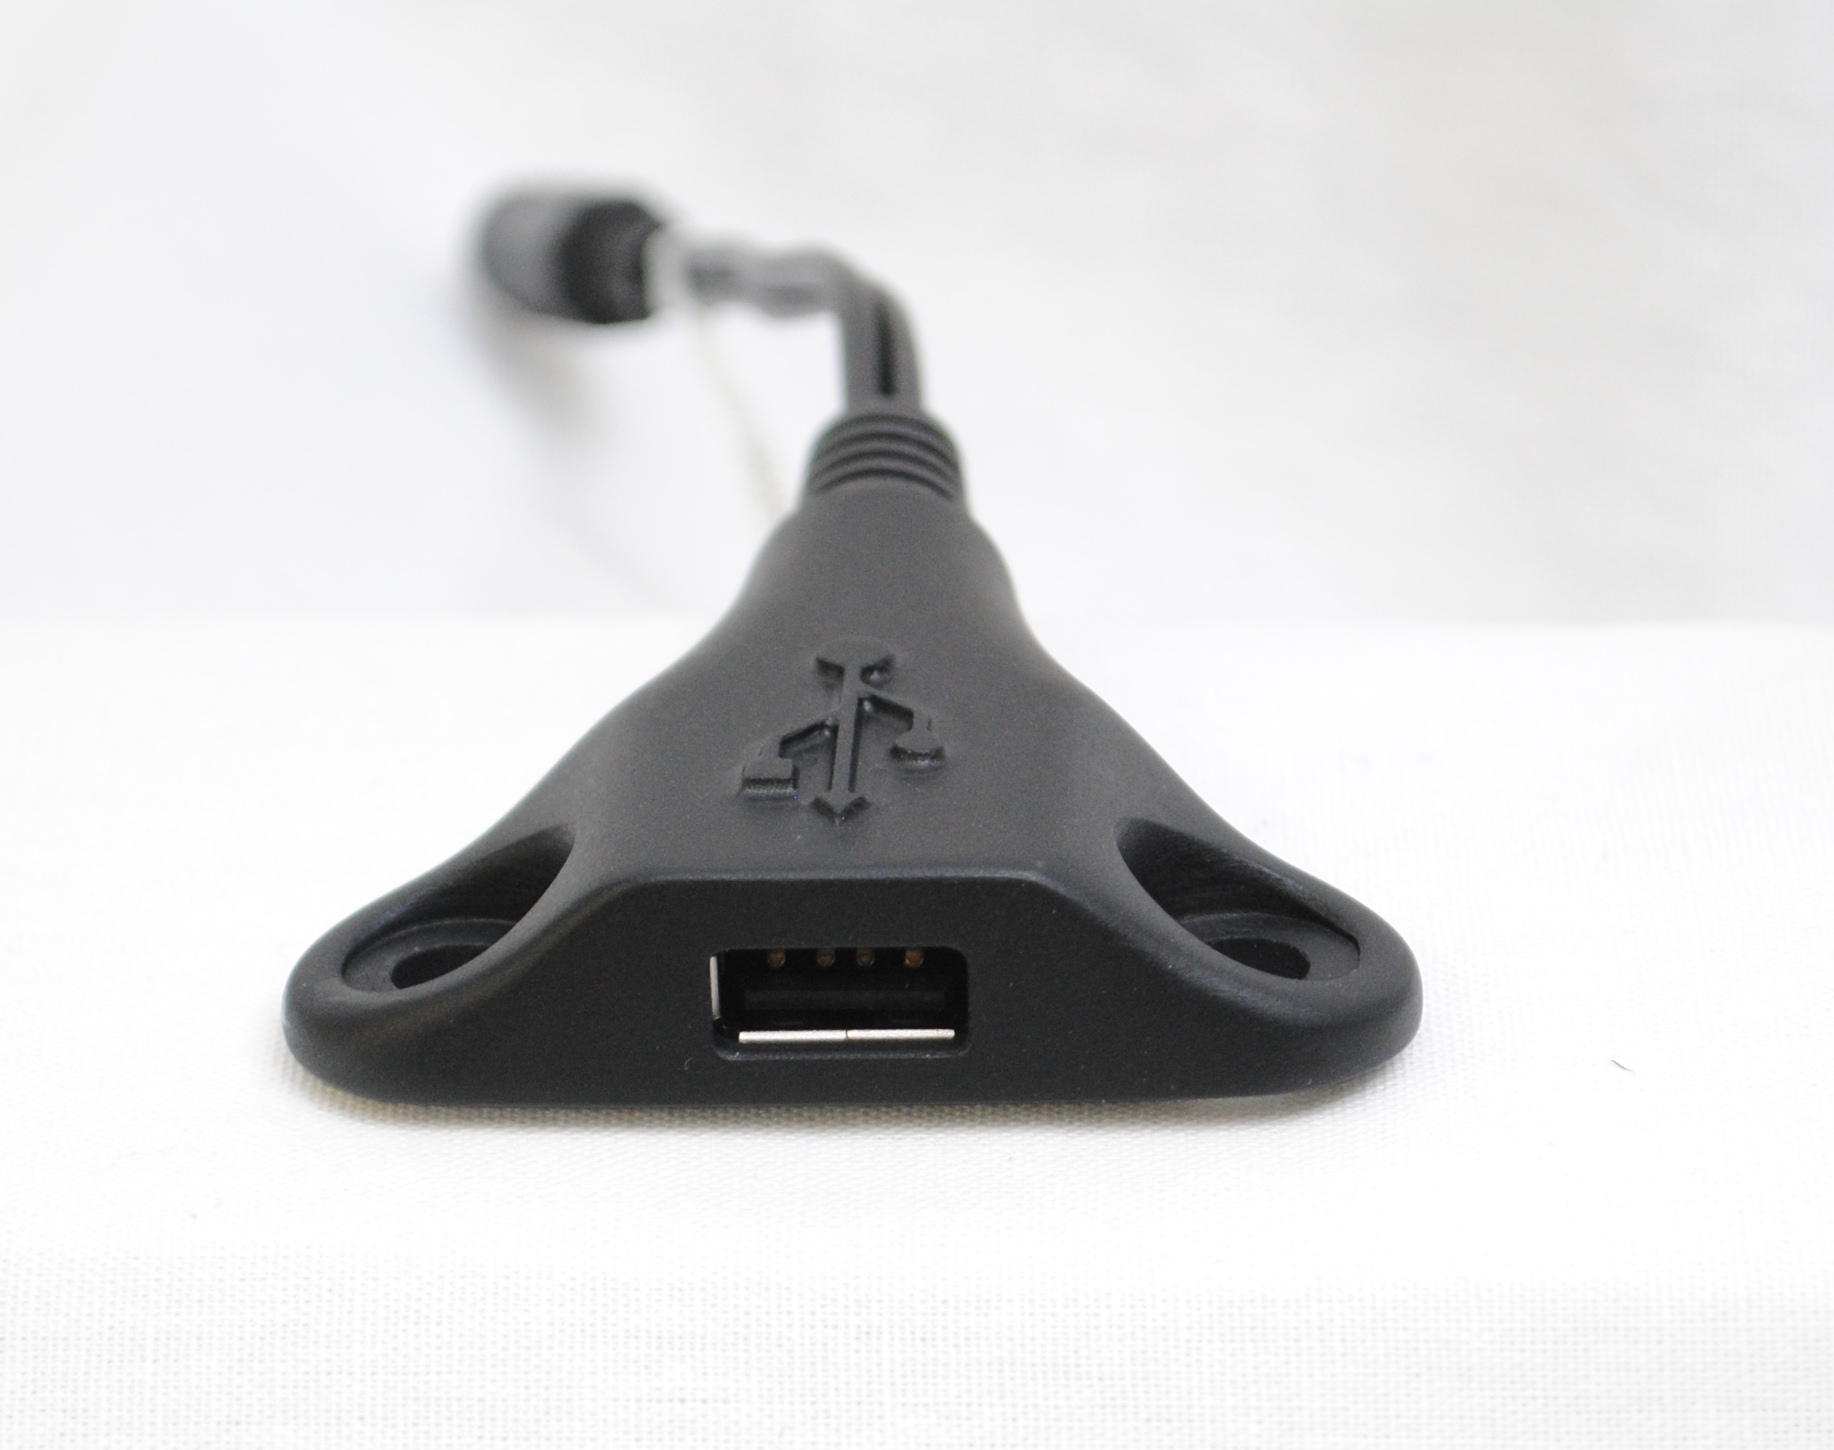 'Screw Mount Single USB Charger